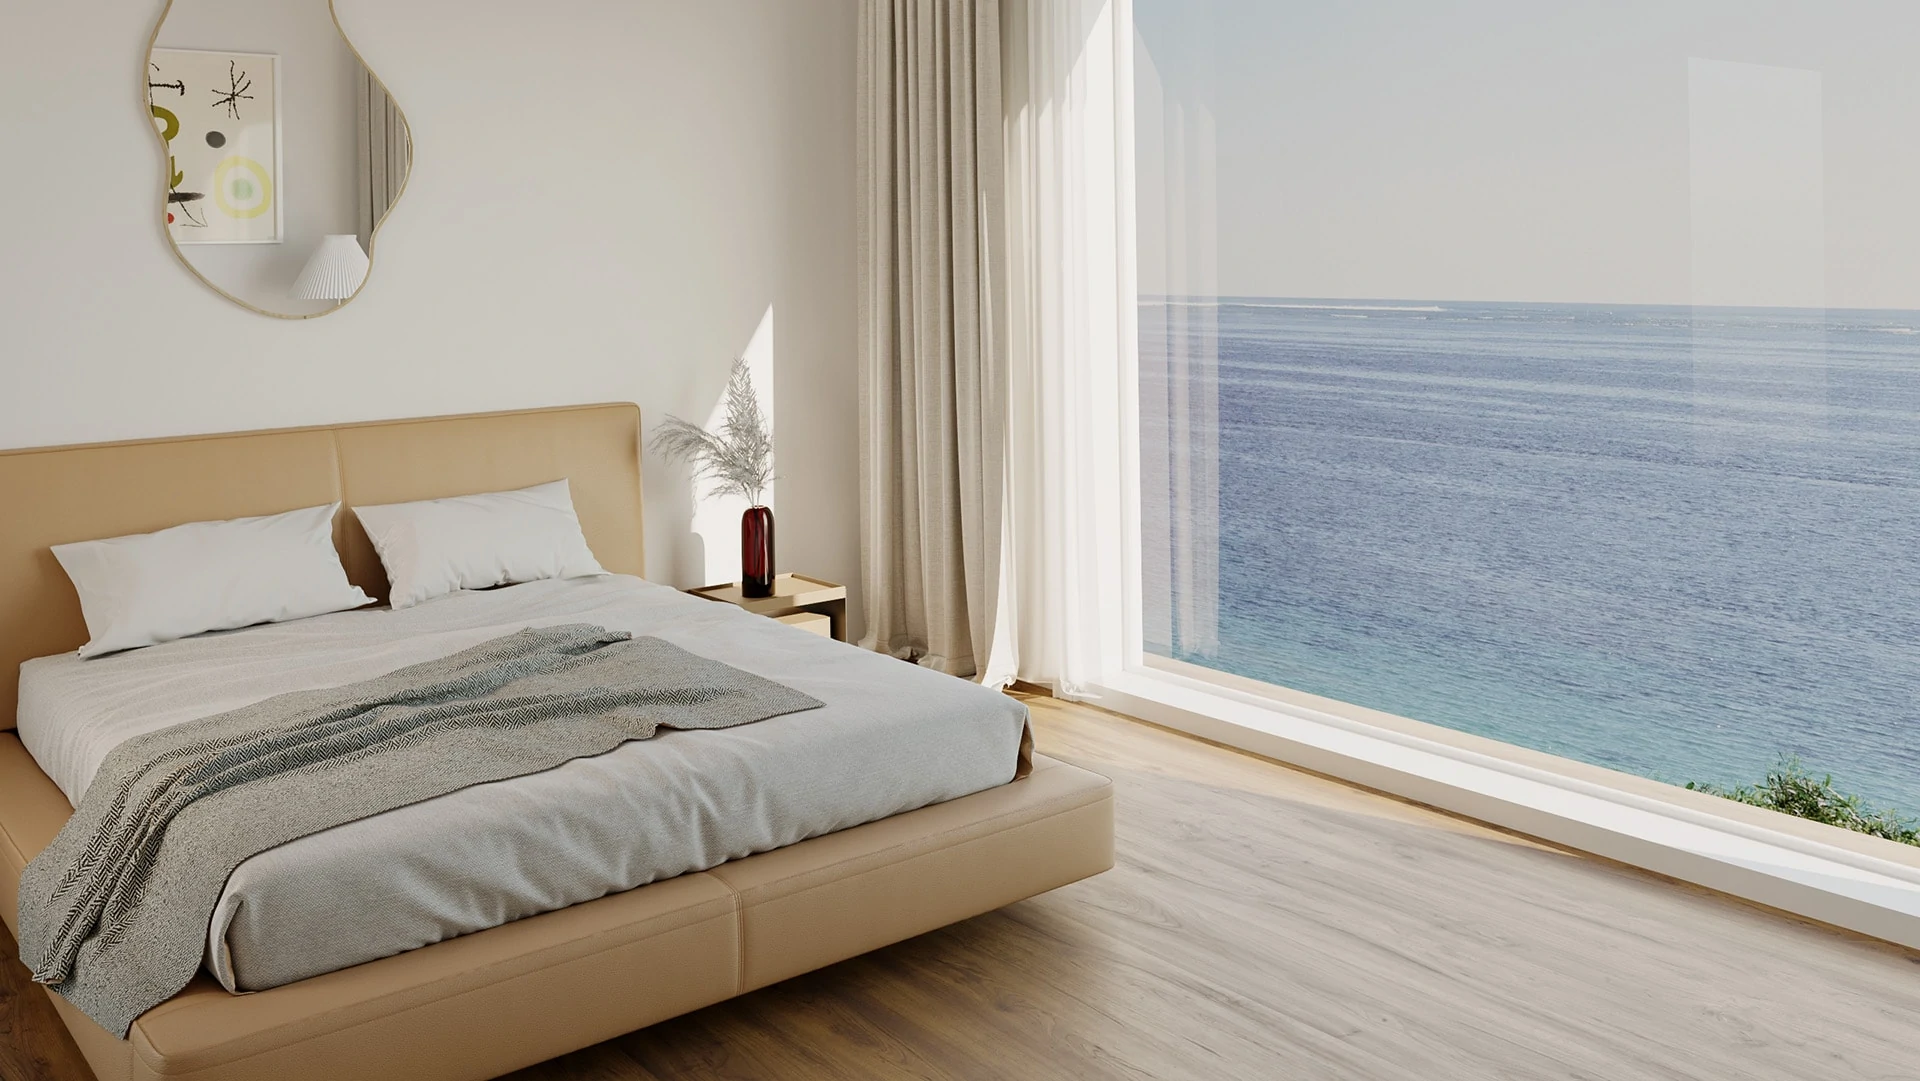 An interior bedroom 3D visualization with a sea view